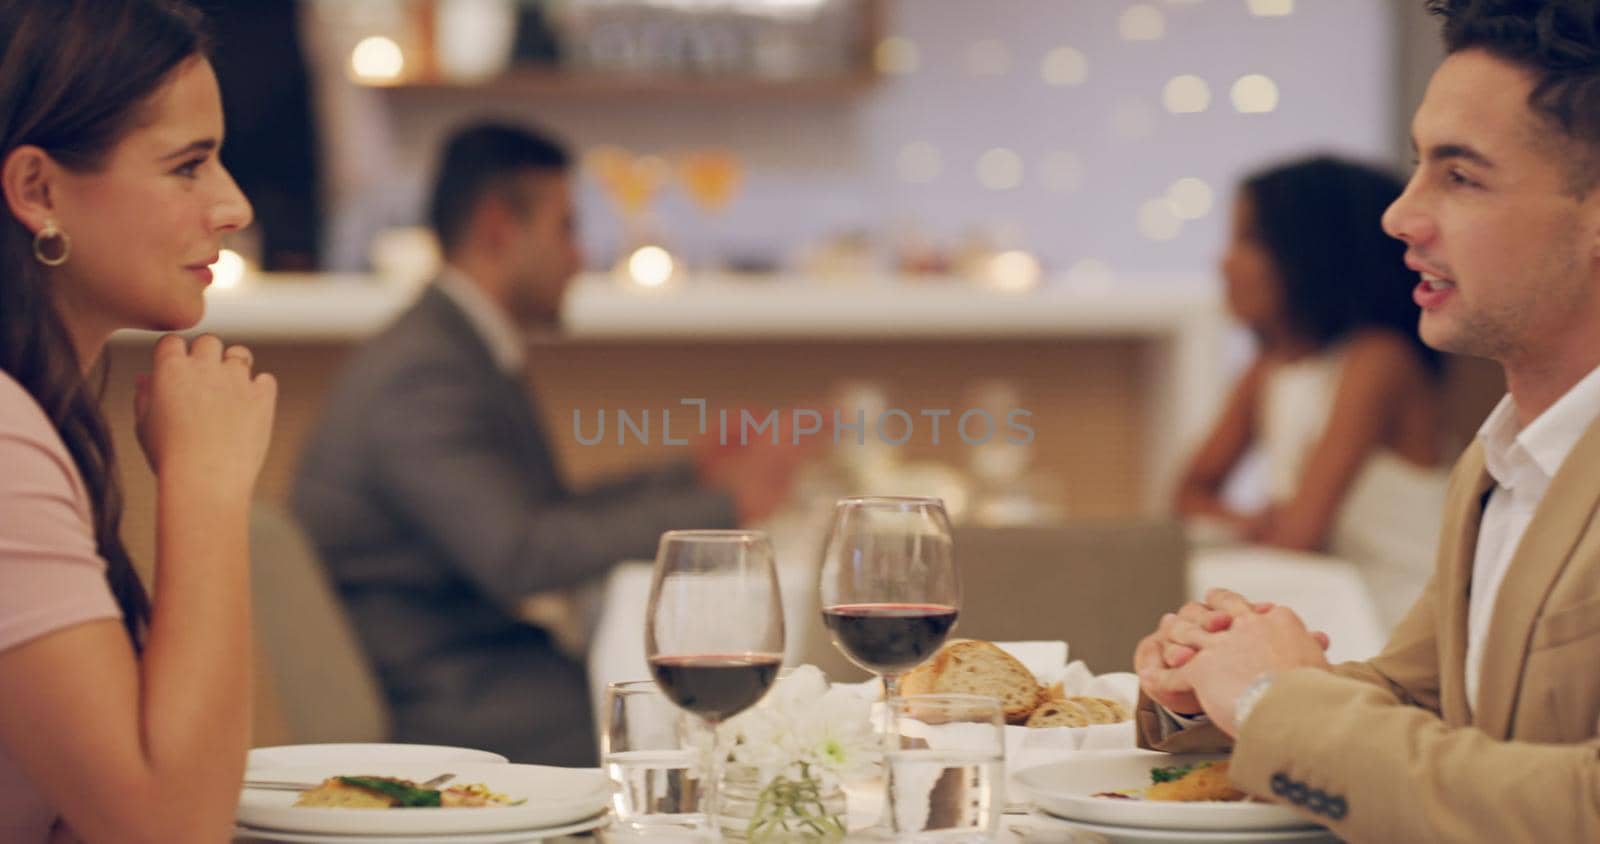 This restaurant is always fully booked. 4k video footage of people enjoying themselves at a restaurant. by YuriArcurs